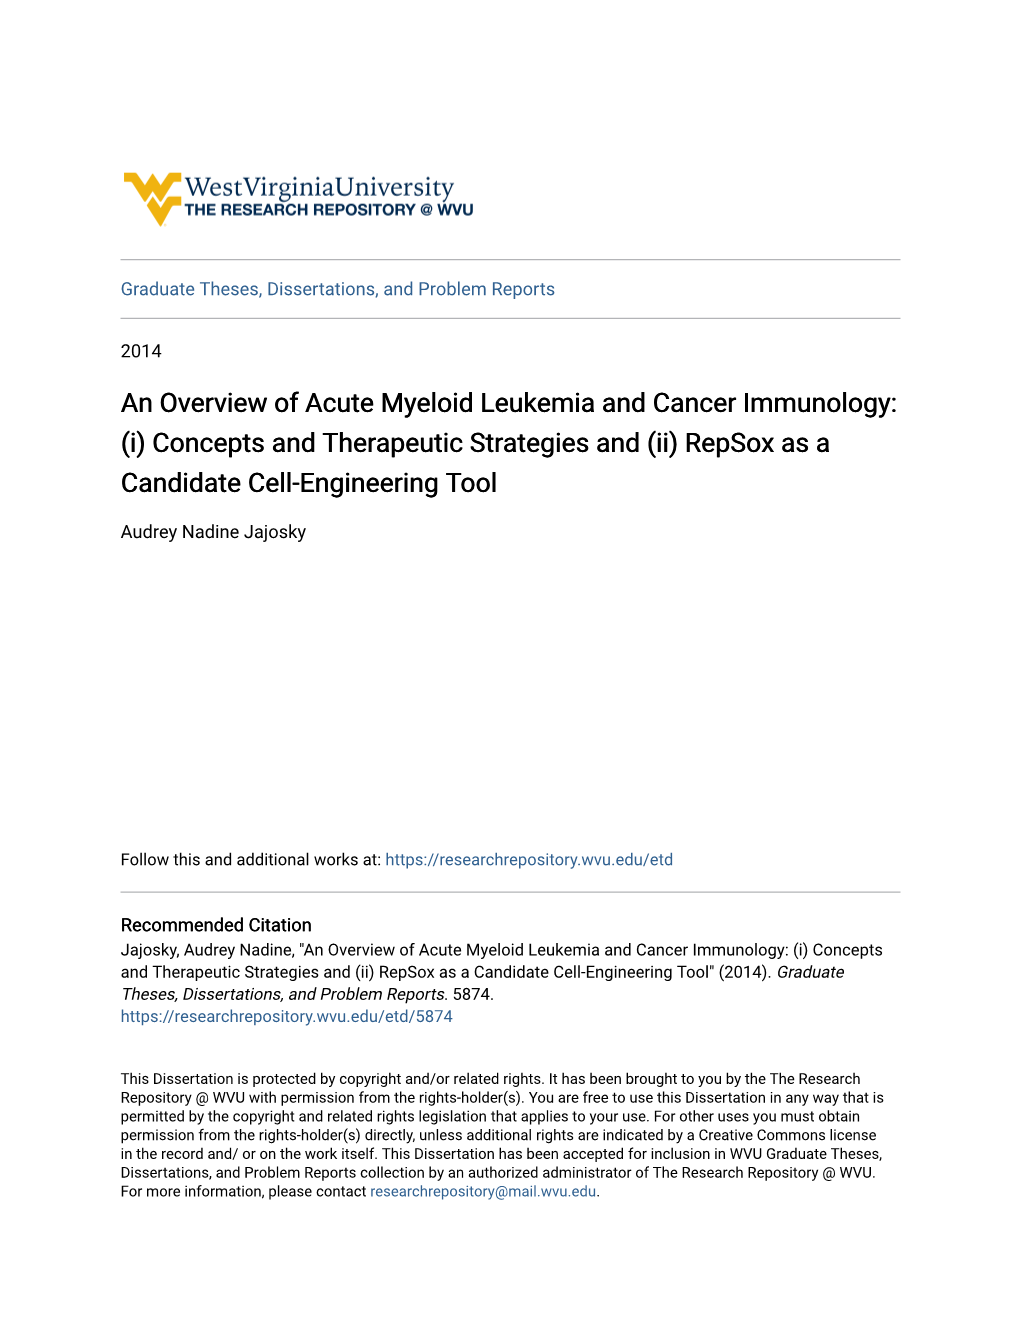 An Overview of Acute Myeloid Leukemia and Cancer Immunology: (I) Concepts and Therapeutic Strategies and (Ii) Repsox As a Candidate Cell-Engineering Tool